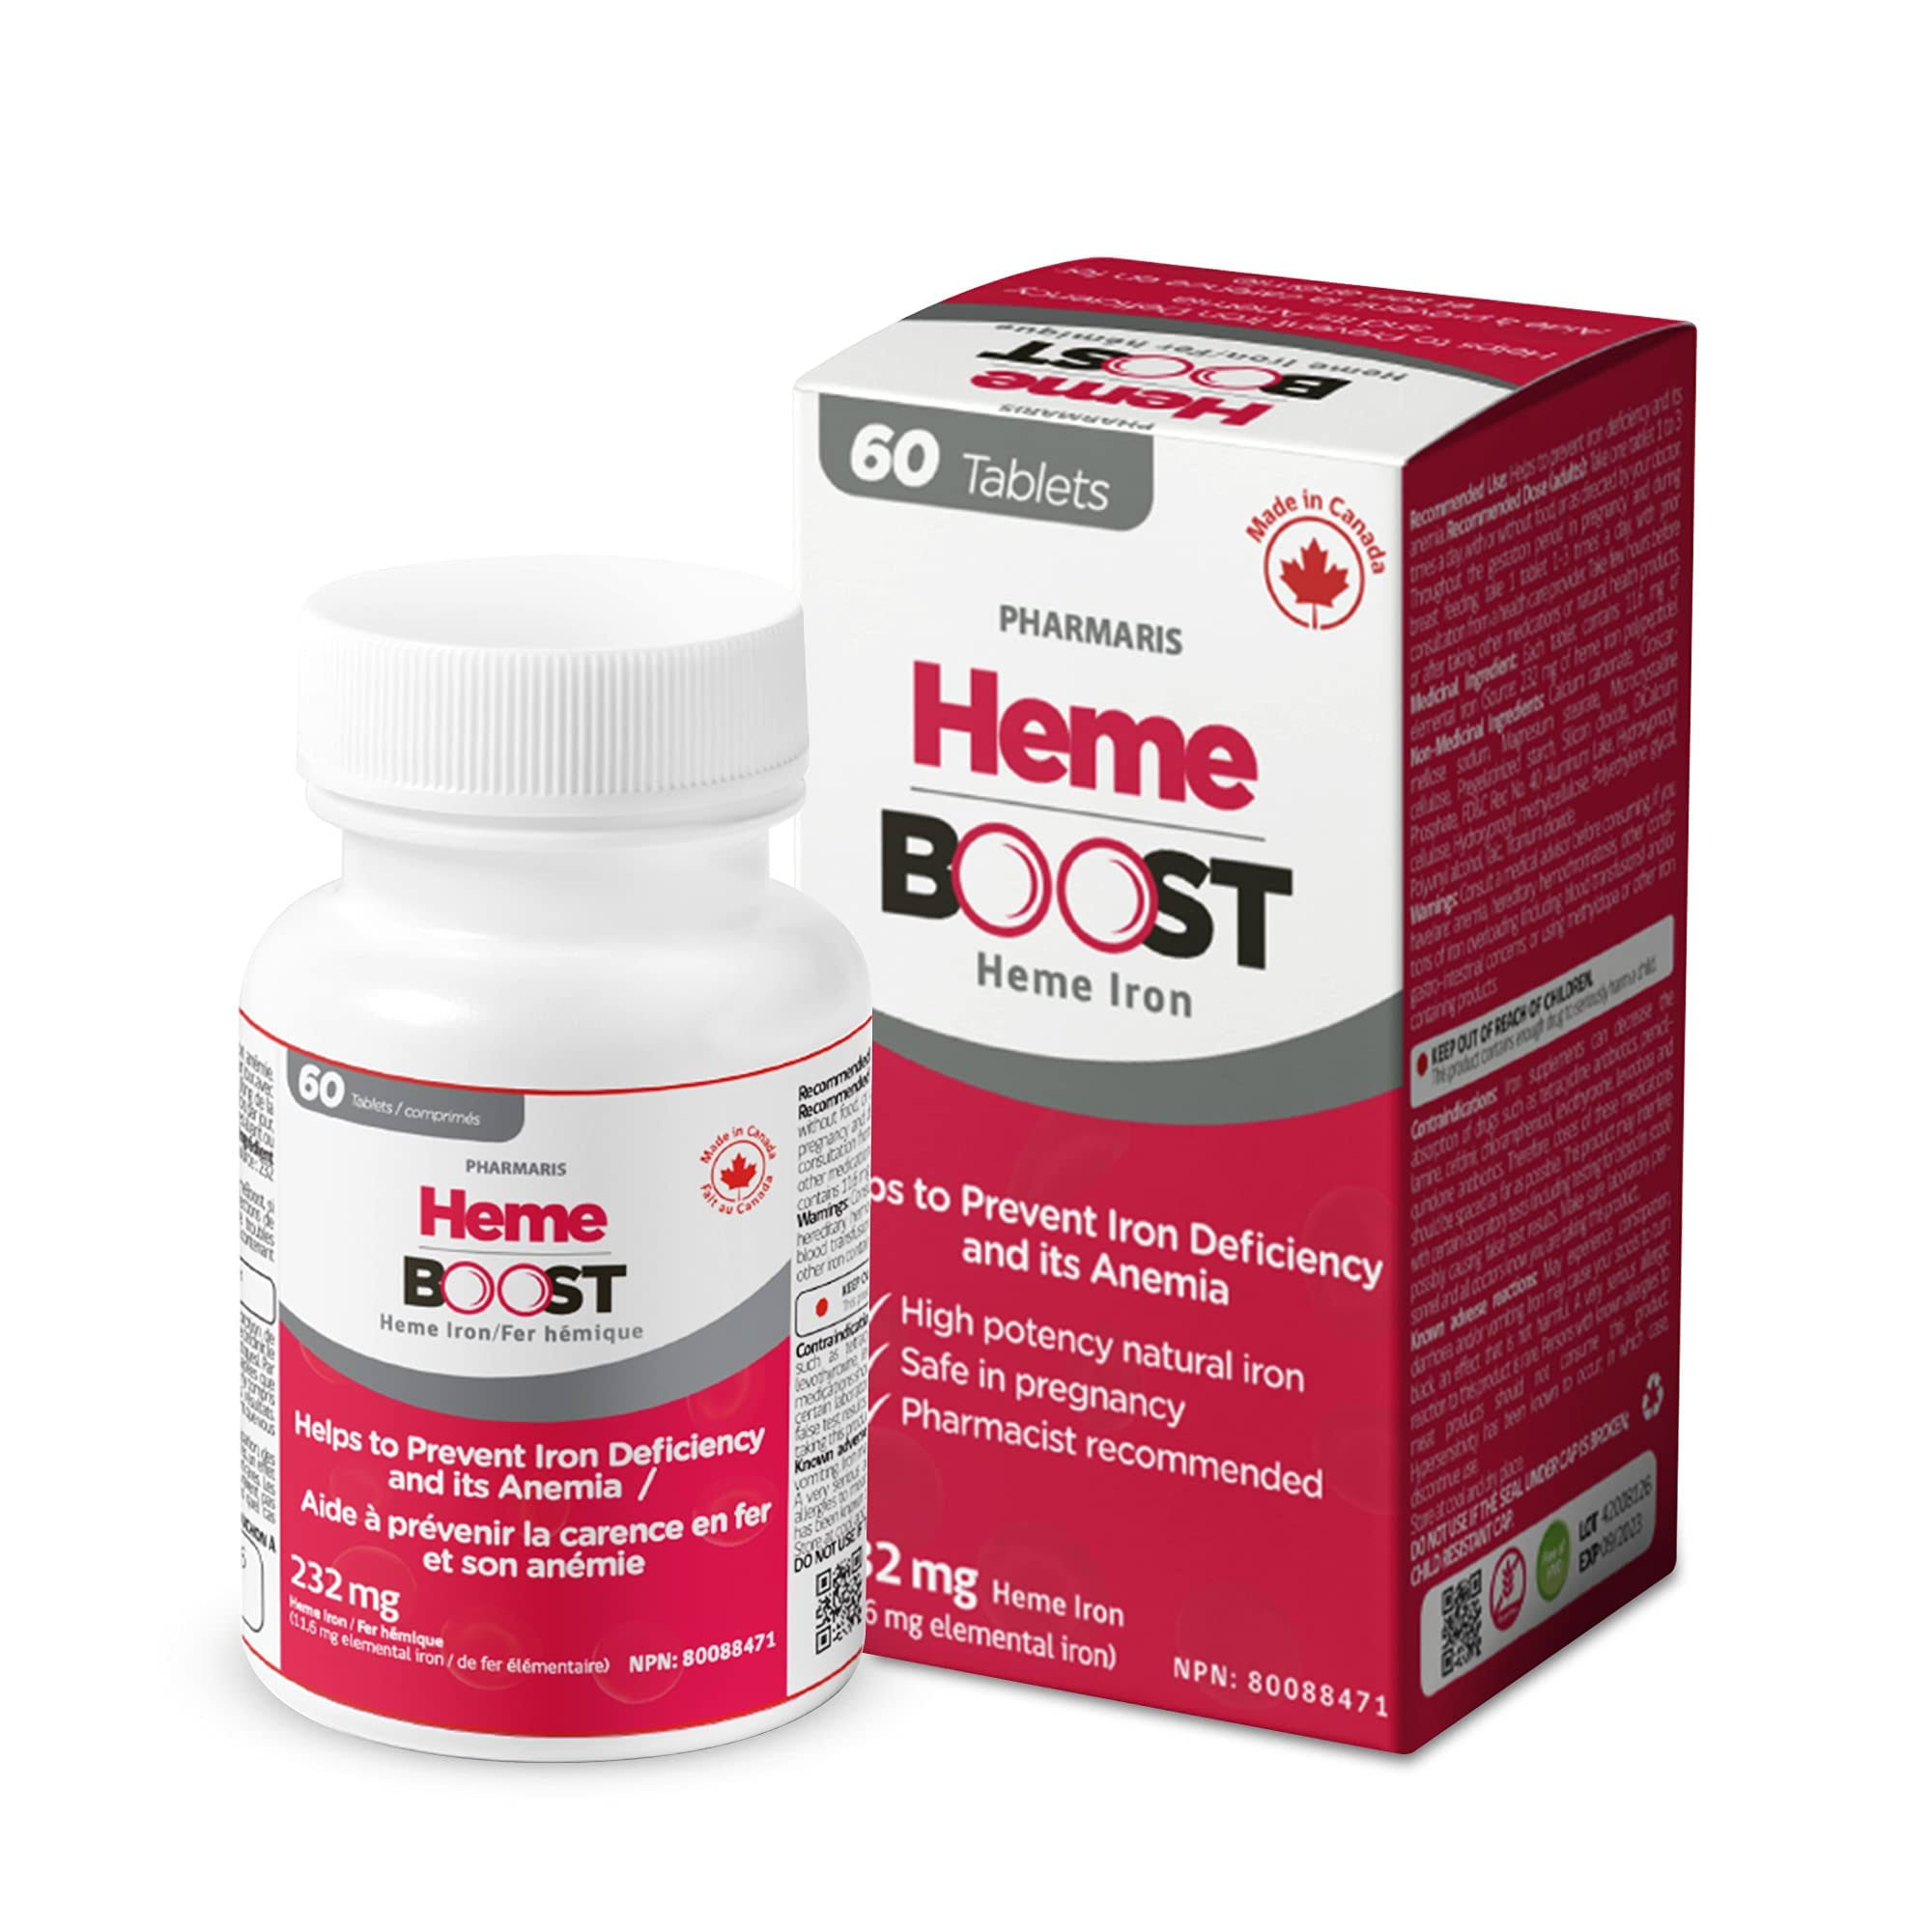 Hemeboost 11.6mg (232mg Heme Iron) I 60 Tablets I High Potency Natural Iron Supplement I High Absorption & Gentle on Stomach I Iron Pills for Adults